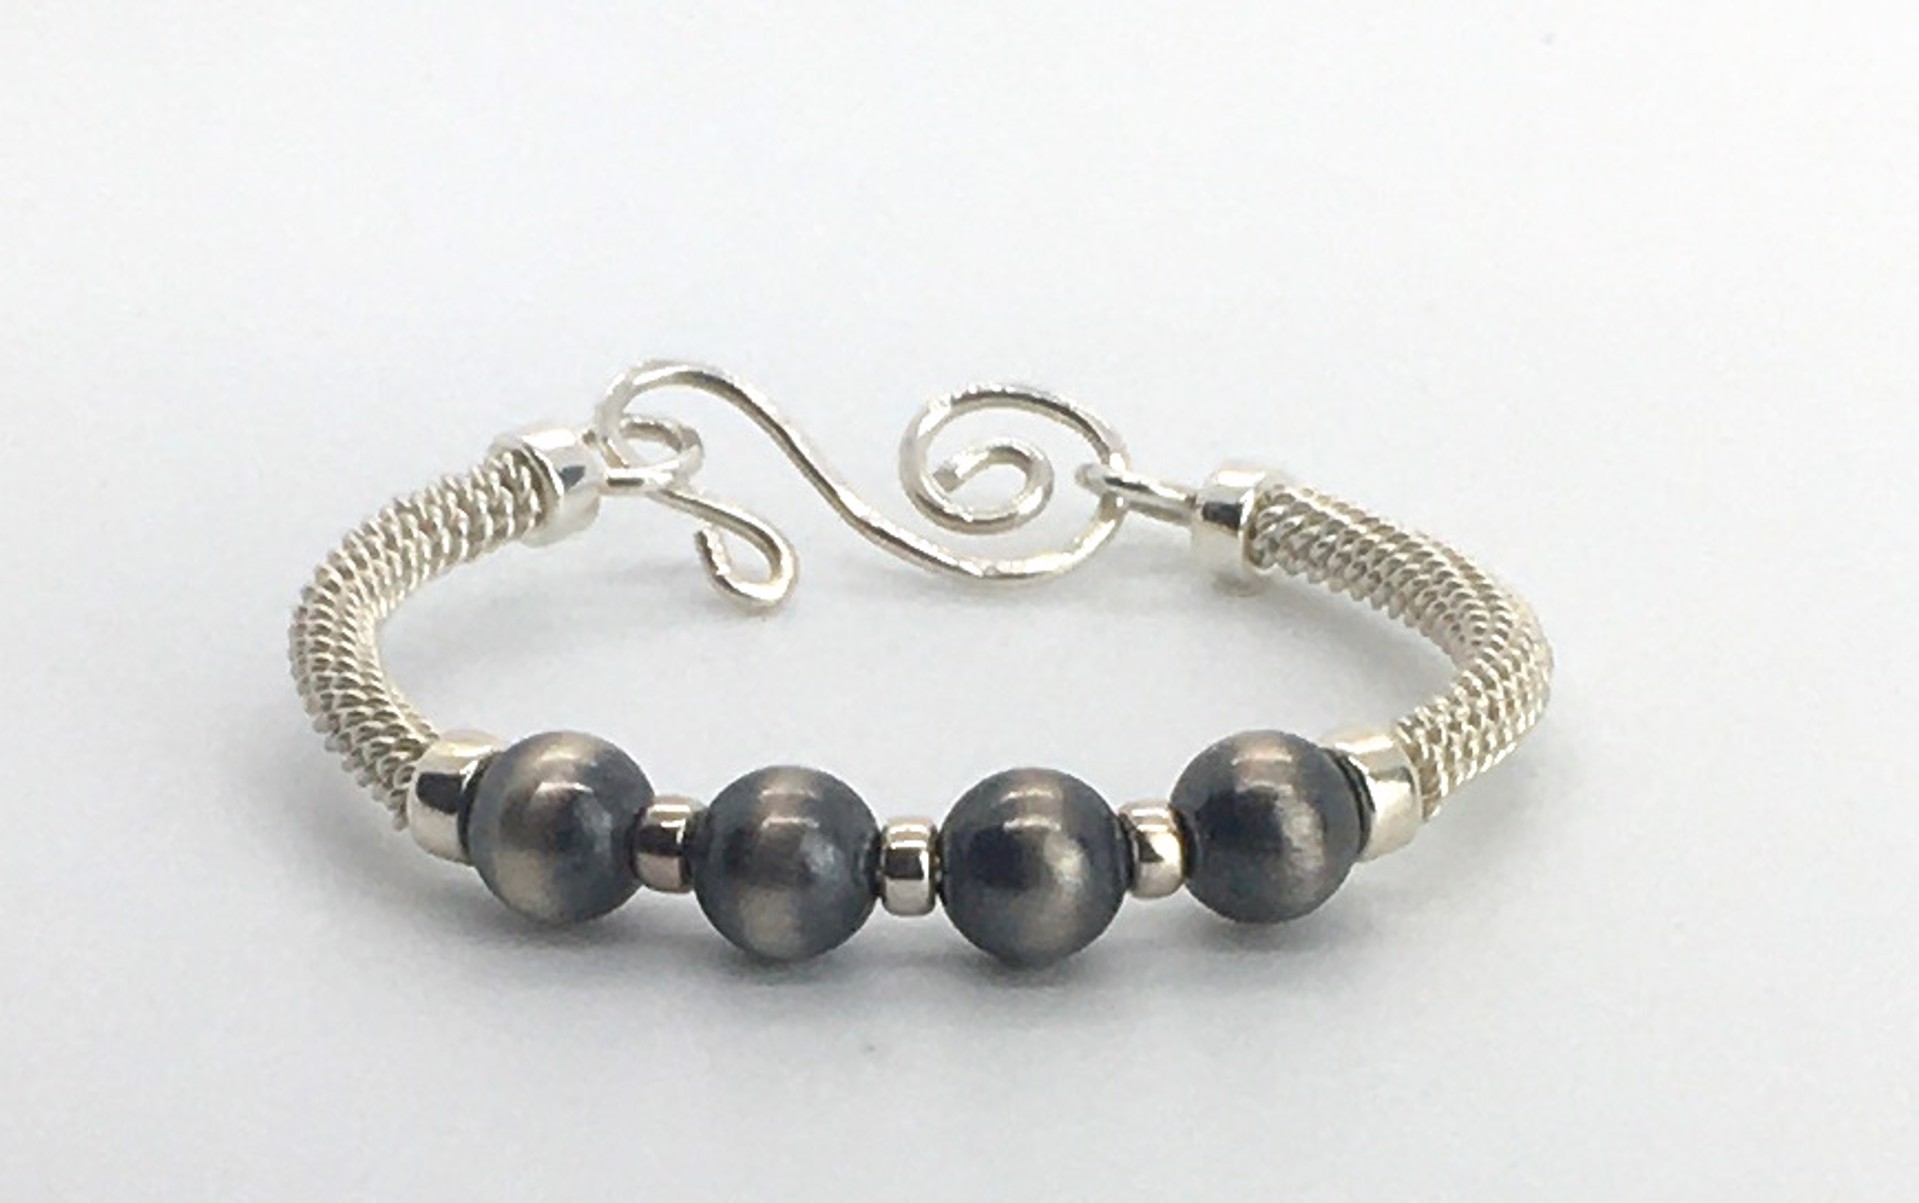  Woven Sterling Silver Bracelet with Oxidized Beads by Suzanne Woodworth